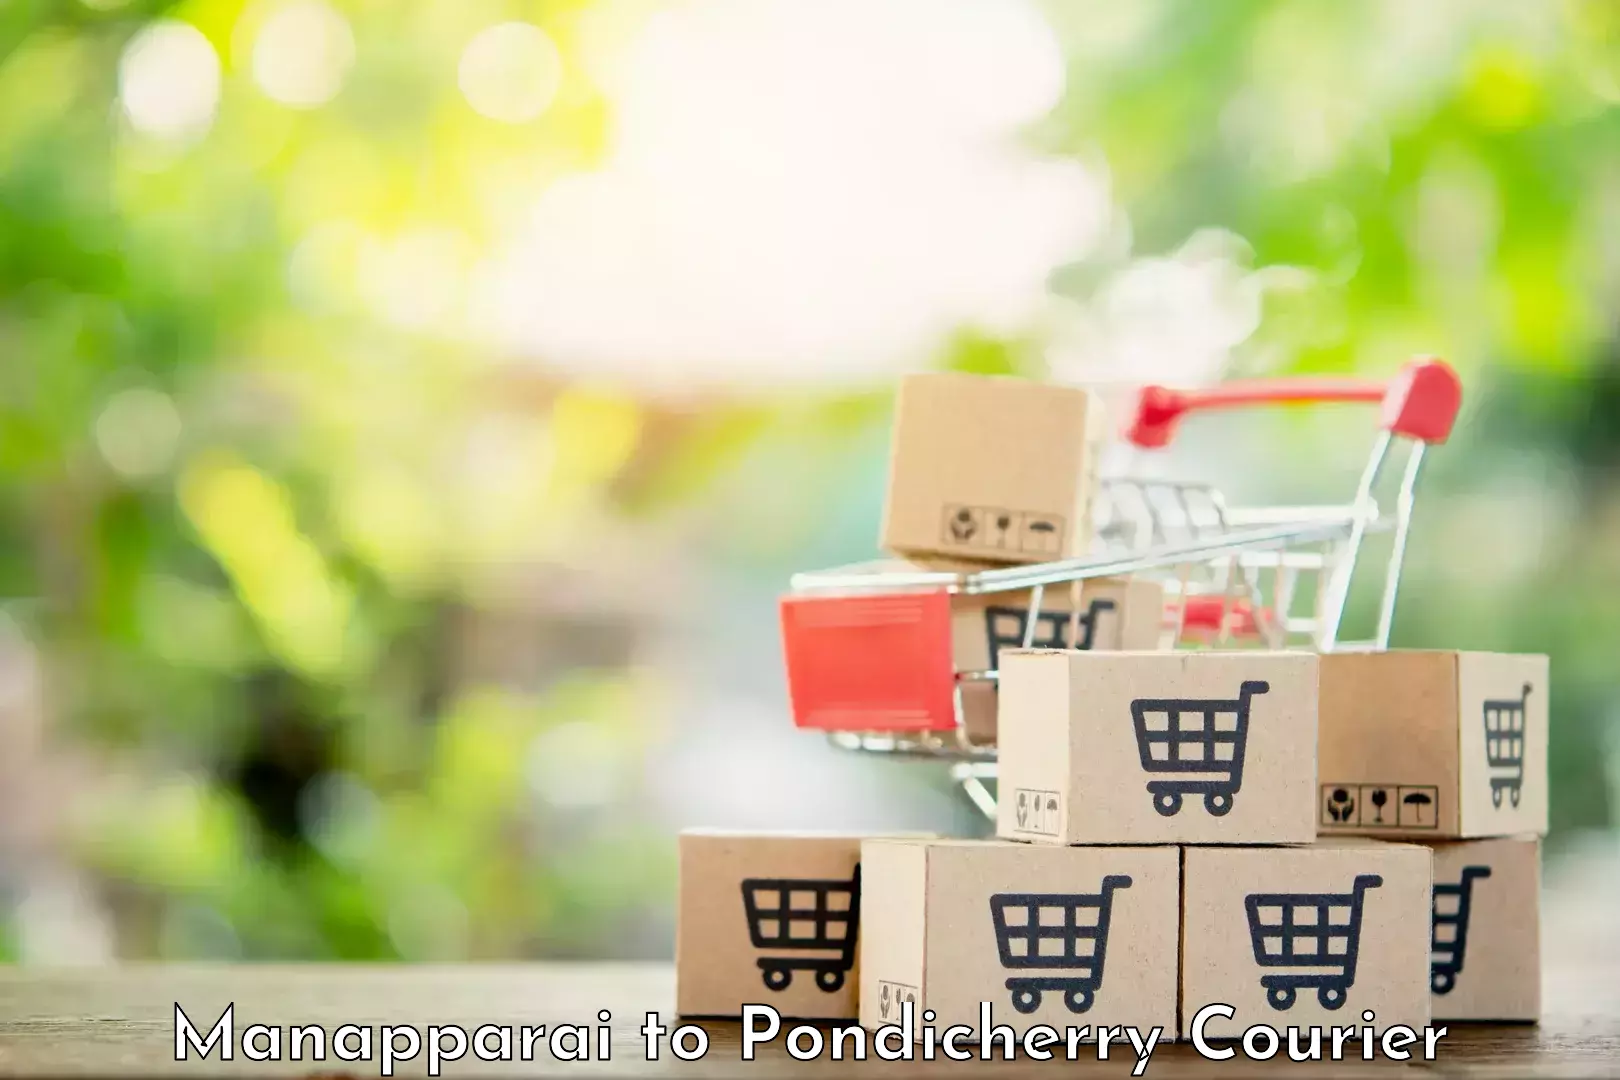 Subscription-based courier Manapparai to Pondicherry